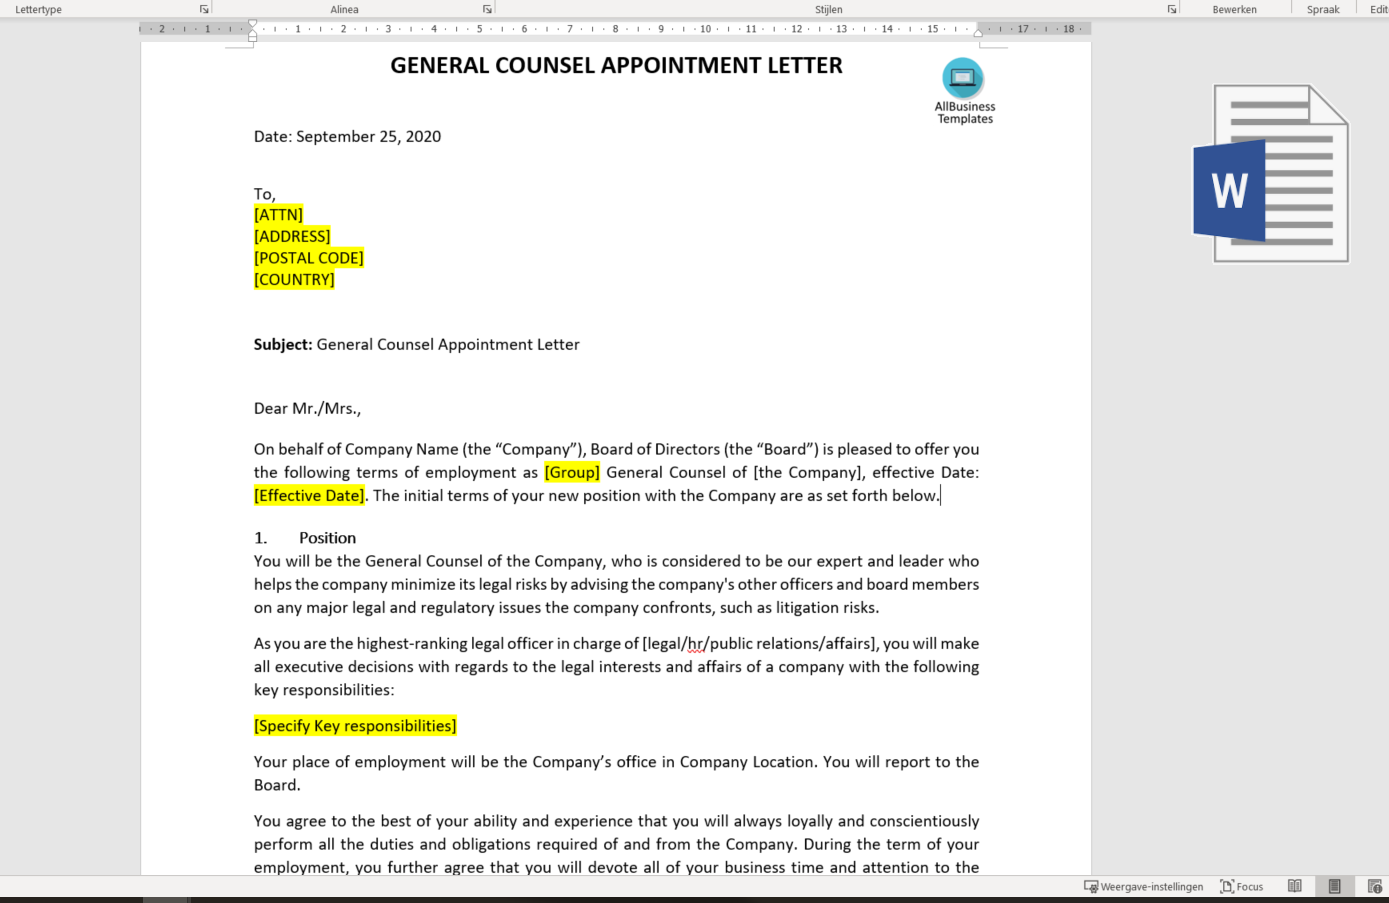 General Counsel Appointment Letter main image